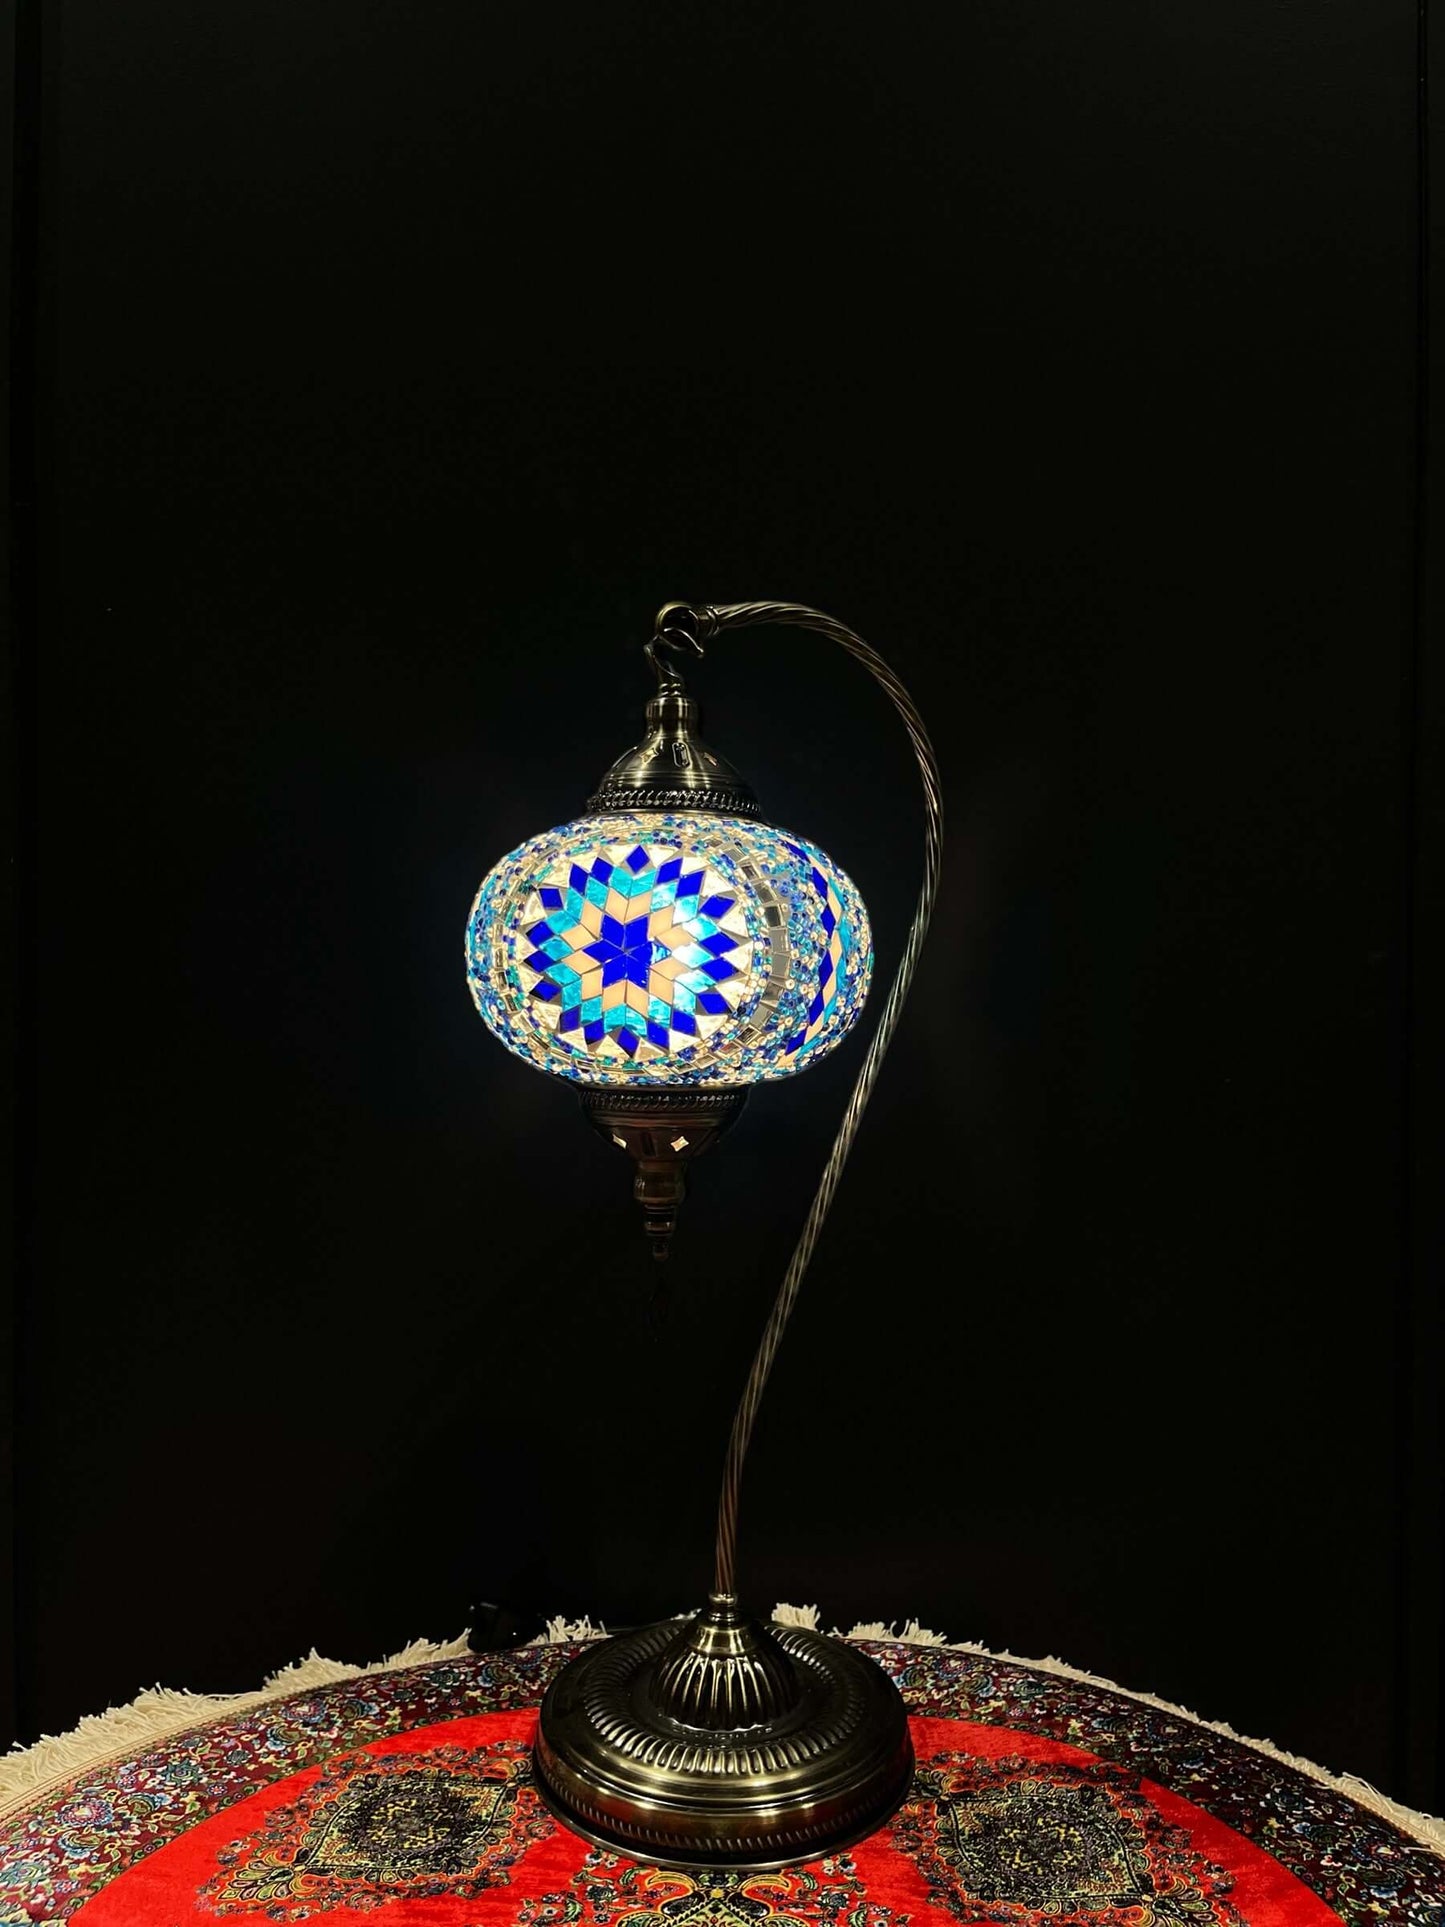 A mosaic lamp, also known as a Turkish lamps, is a decorative lighting fixture with intricate designs and colorful glass pieces.